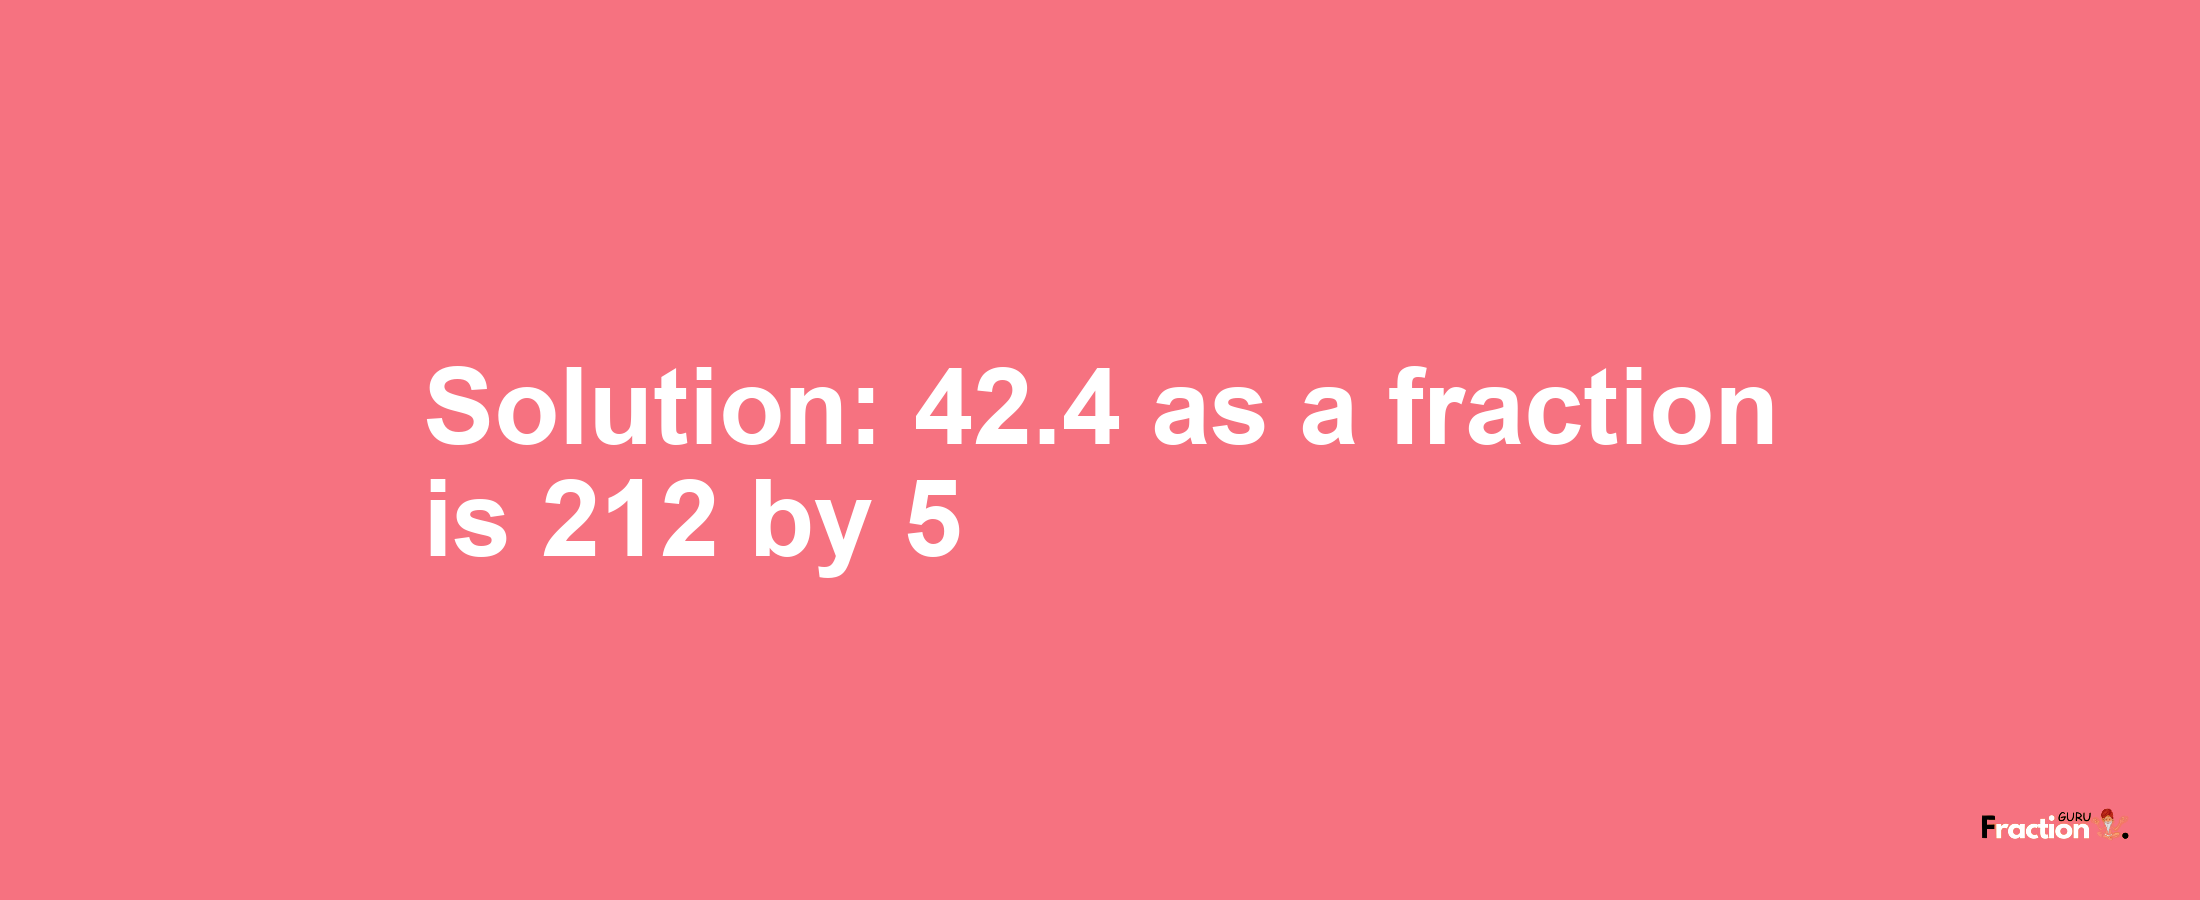 Solution:42.4 as a fraction is 212/5